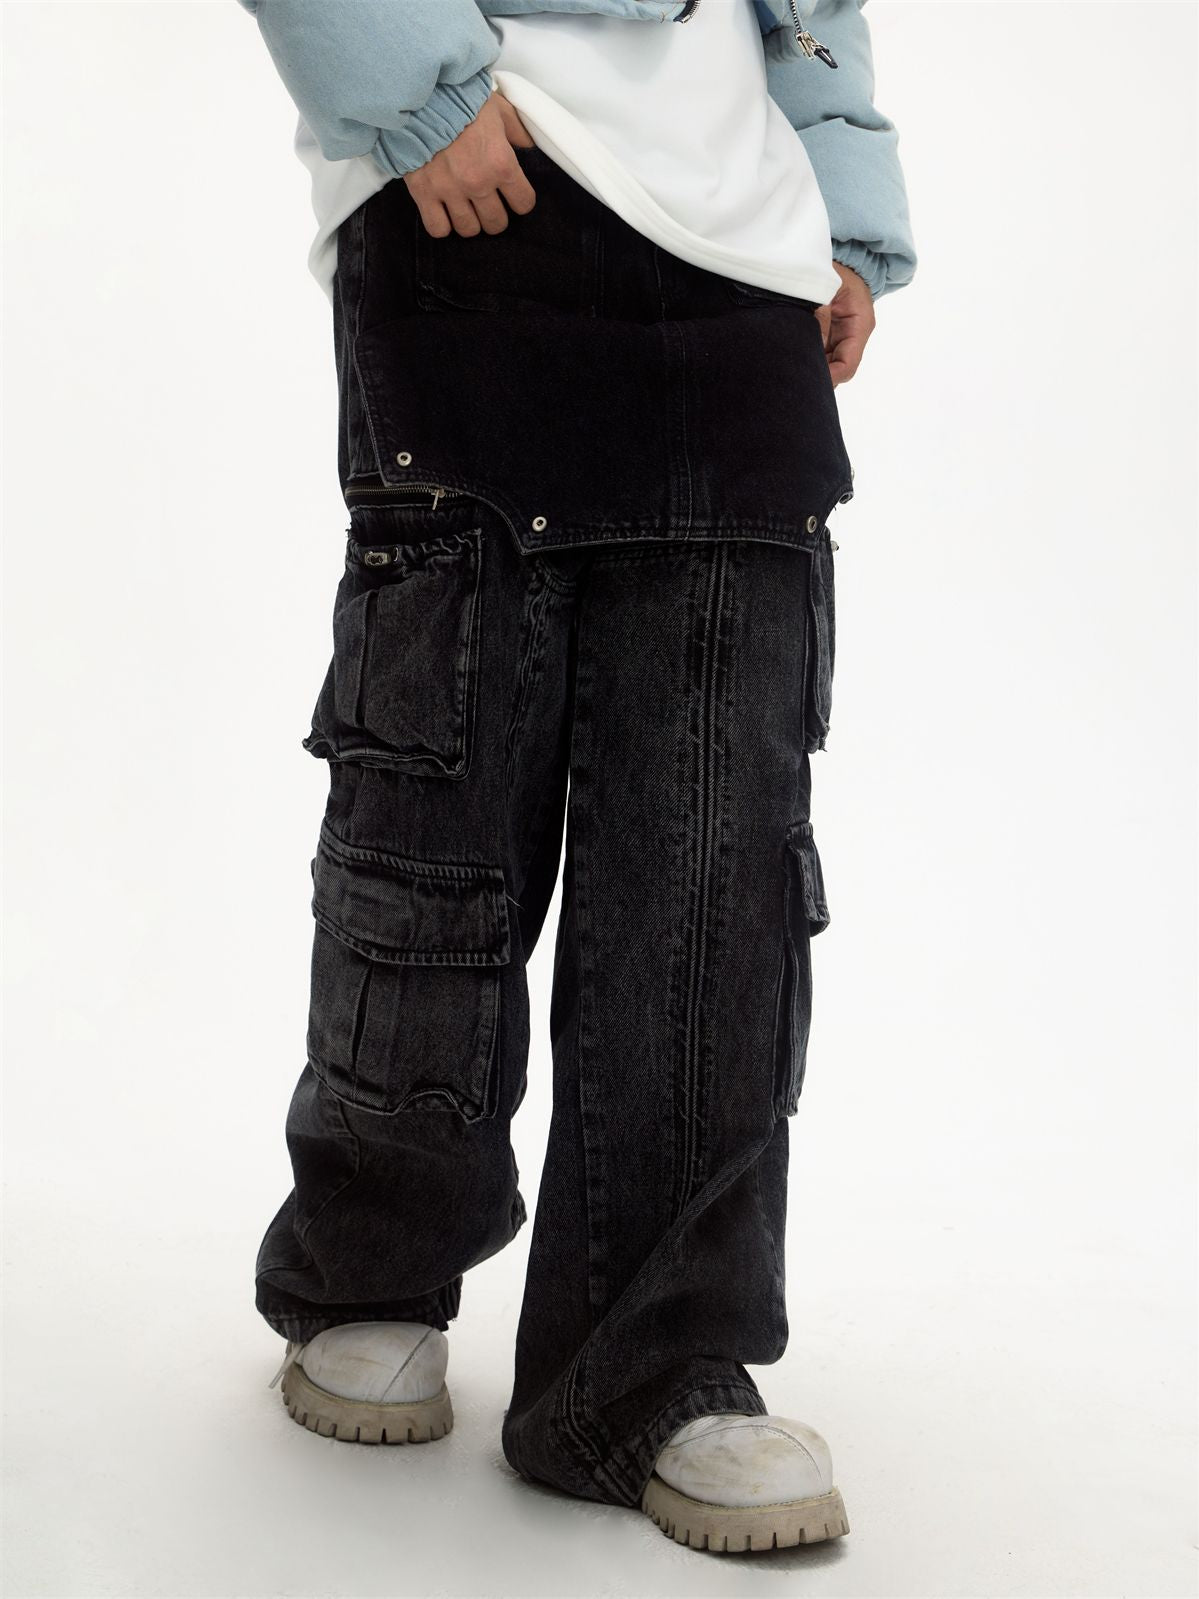 Y2Karchive abahouse gimmick cargo pants - ワークパンツ/カーゴパンツ